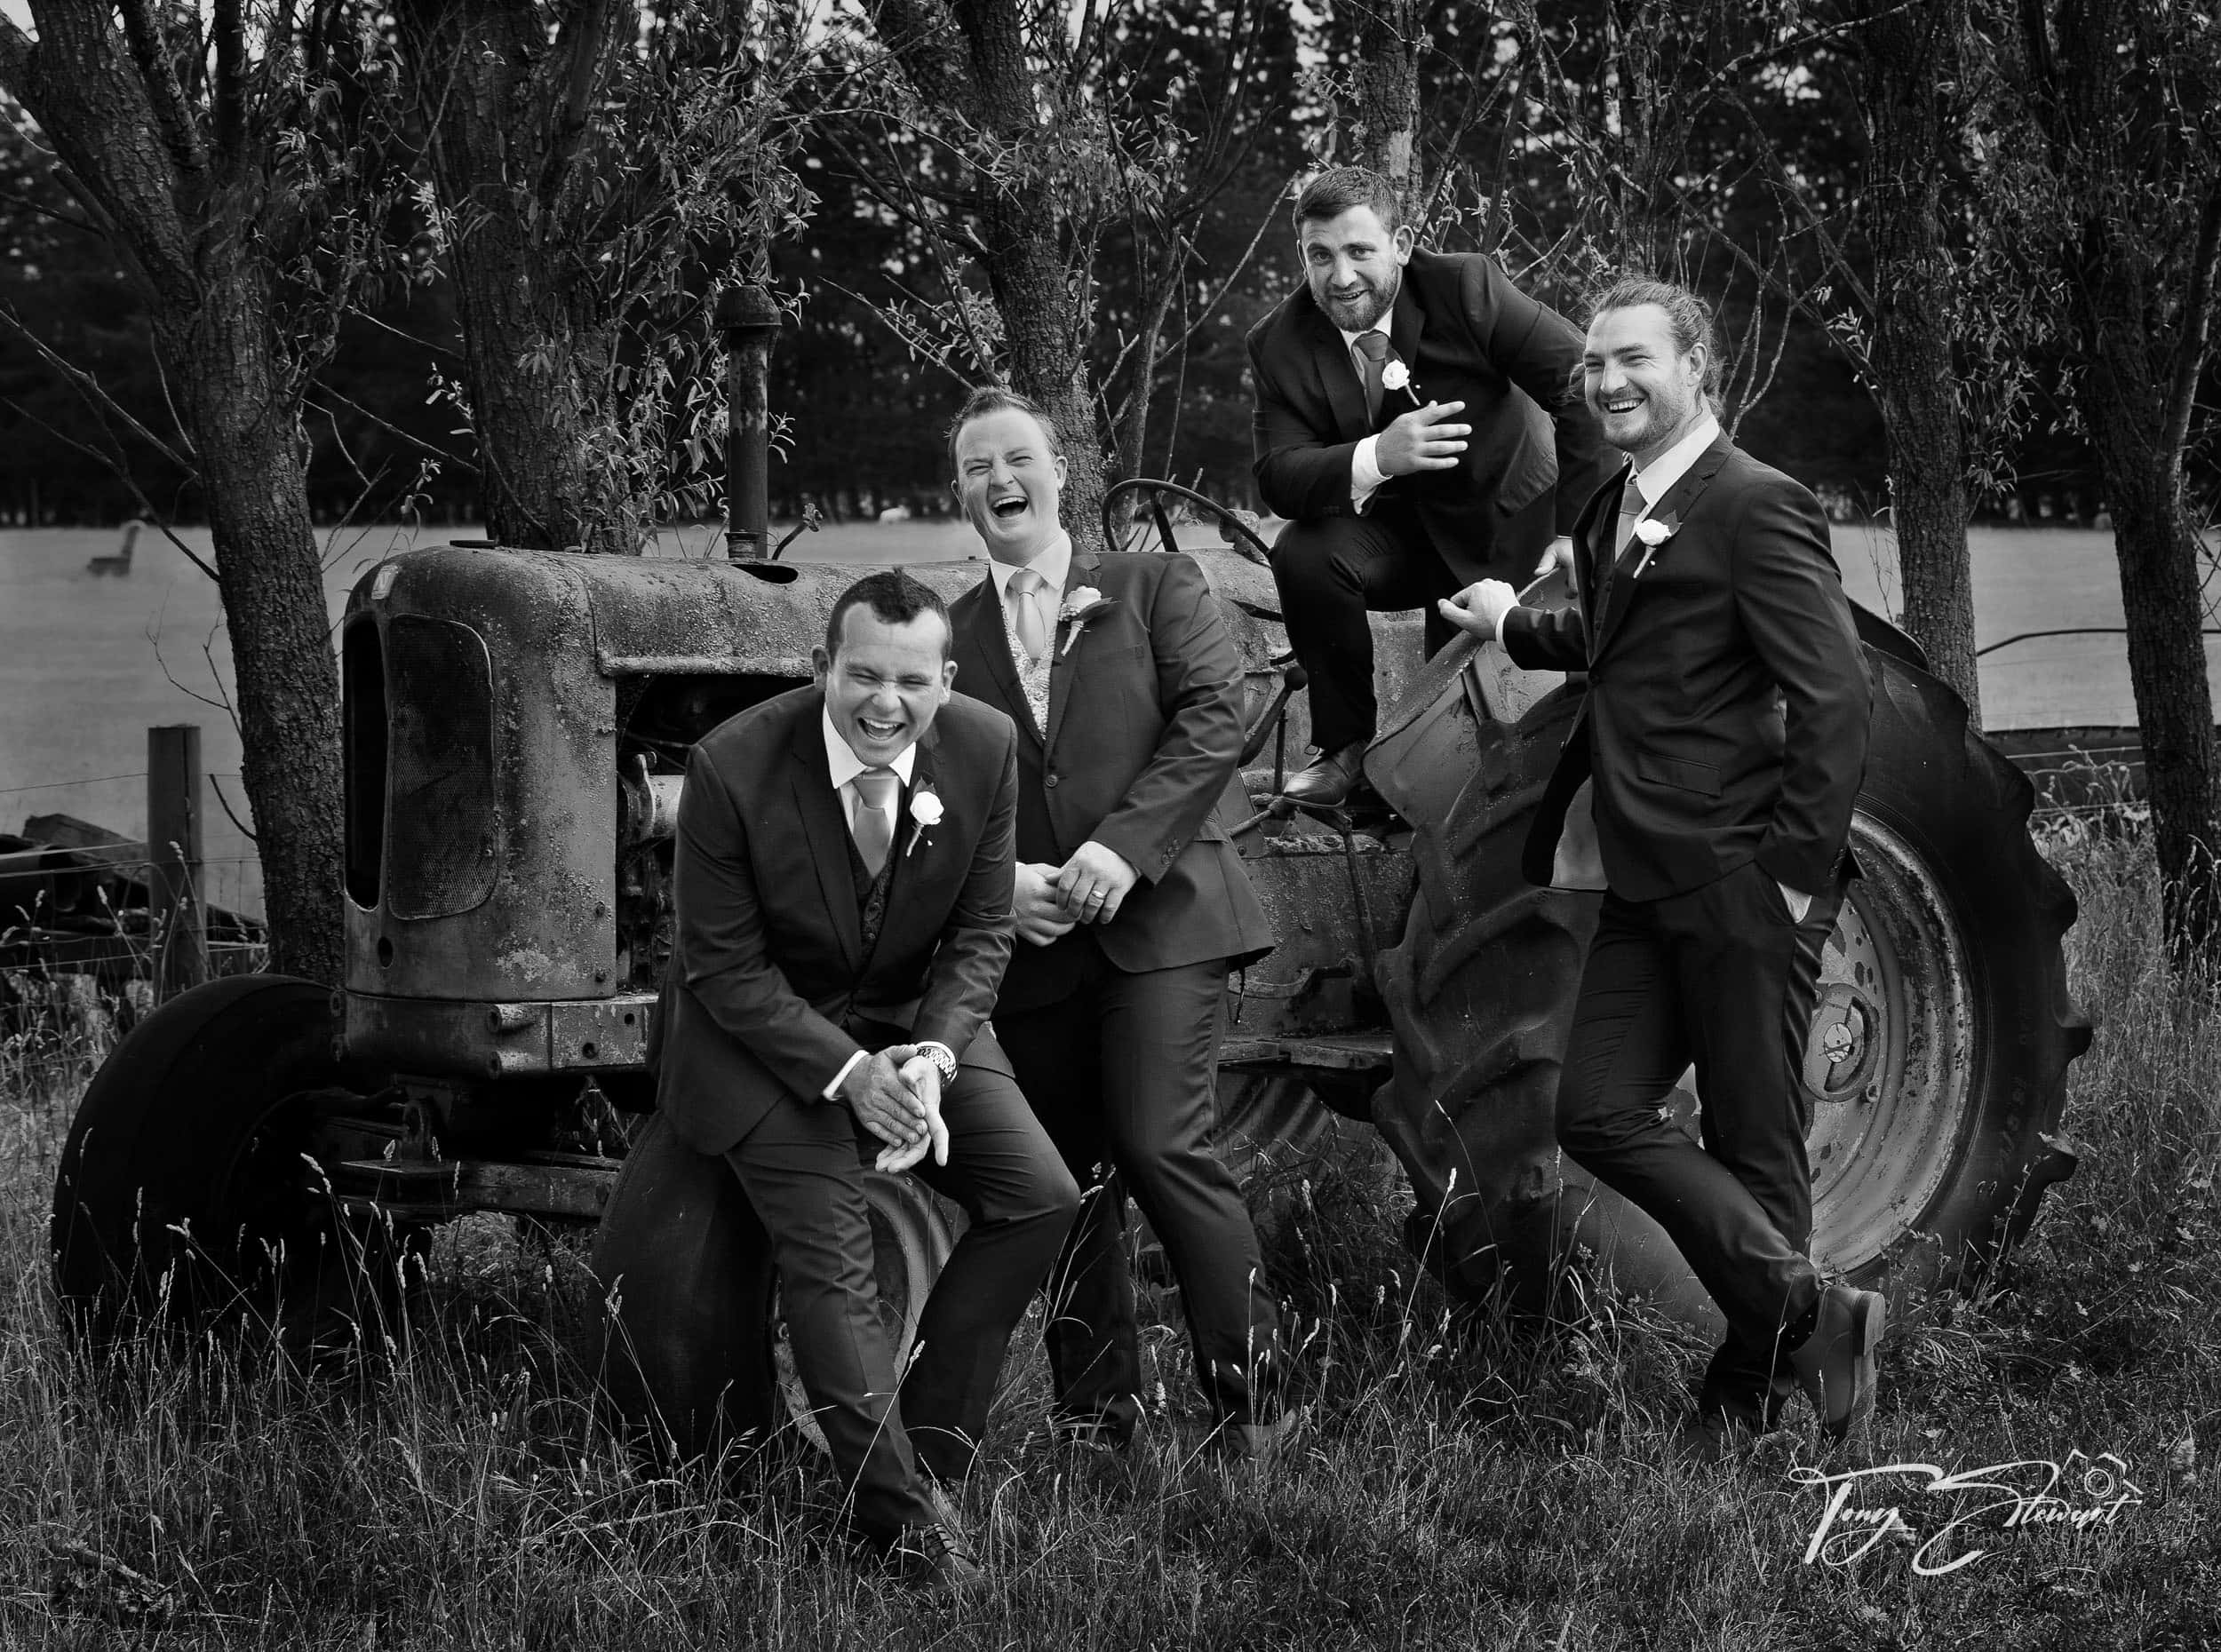 Groomsmen have a good laugh seated on farm tractor in Loburn, North Canterbury.